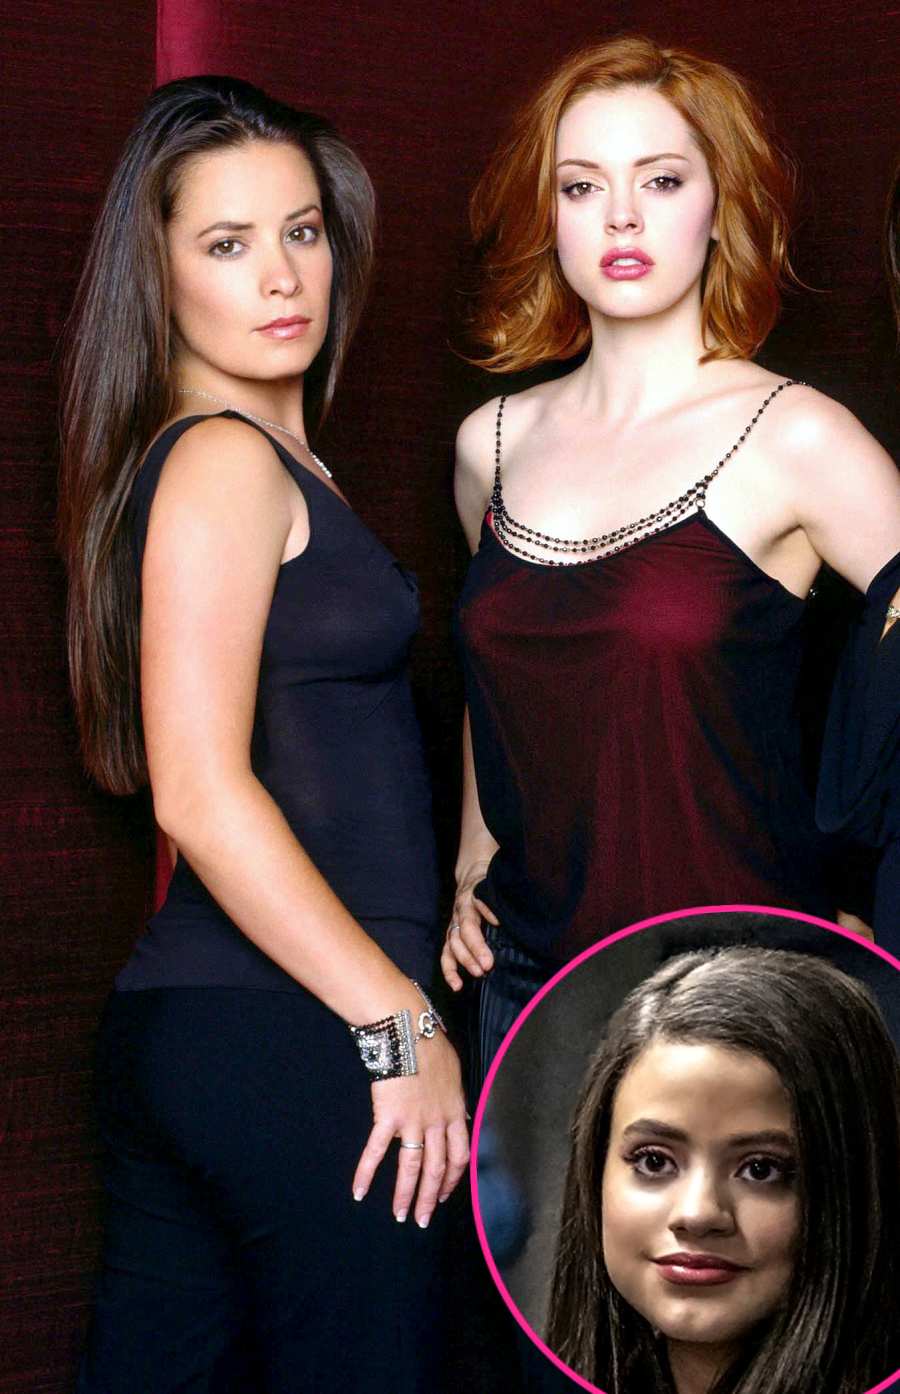 Charmed Behind-the-Scenes Drama Over Years A Timeline 2020 Sarah Jeffery